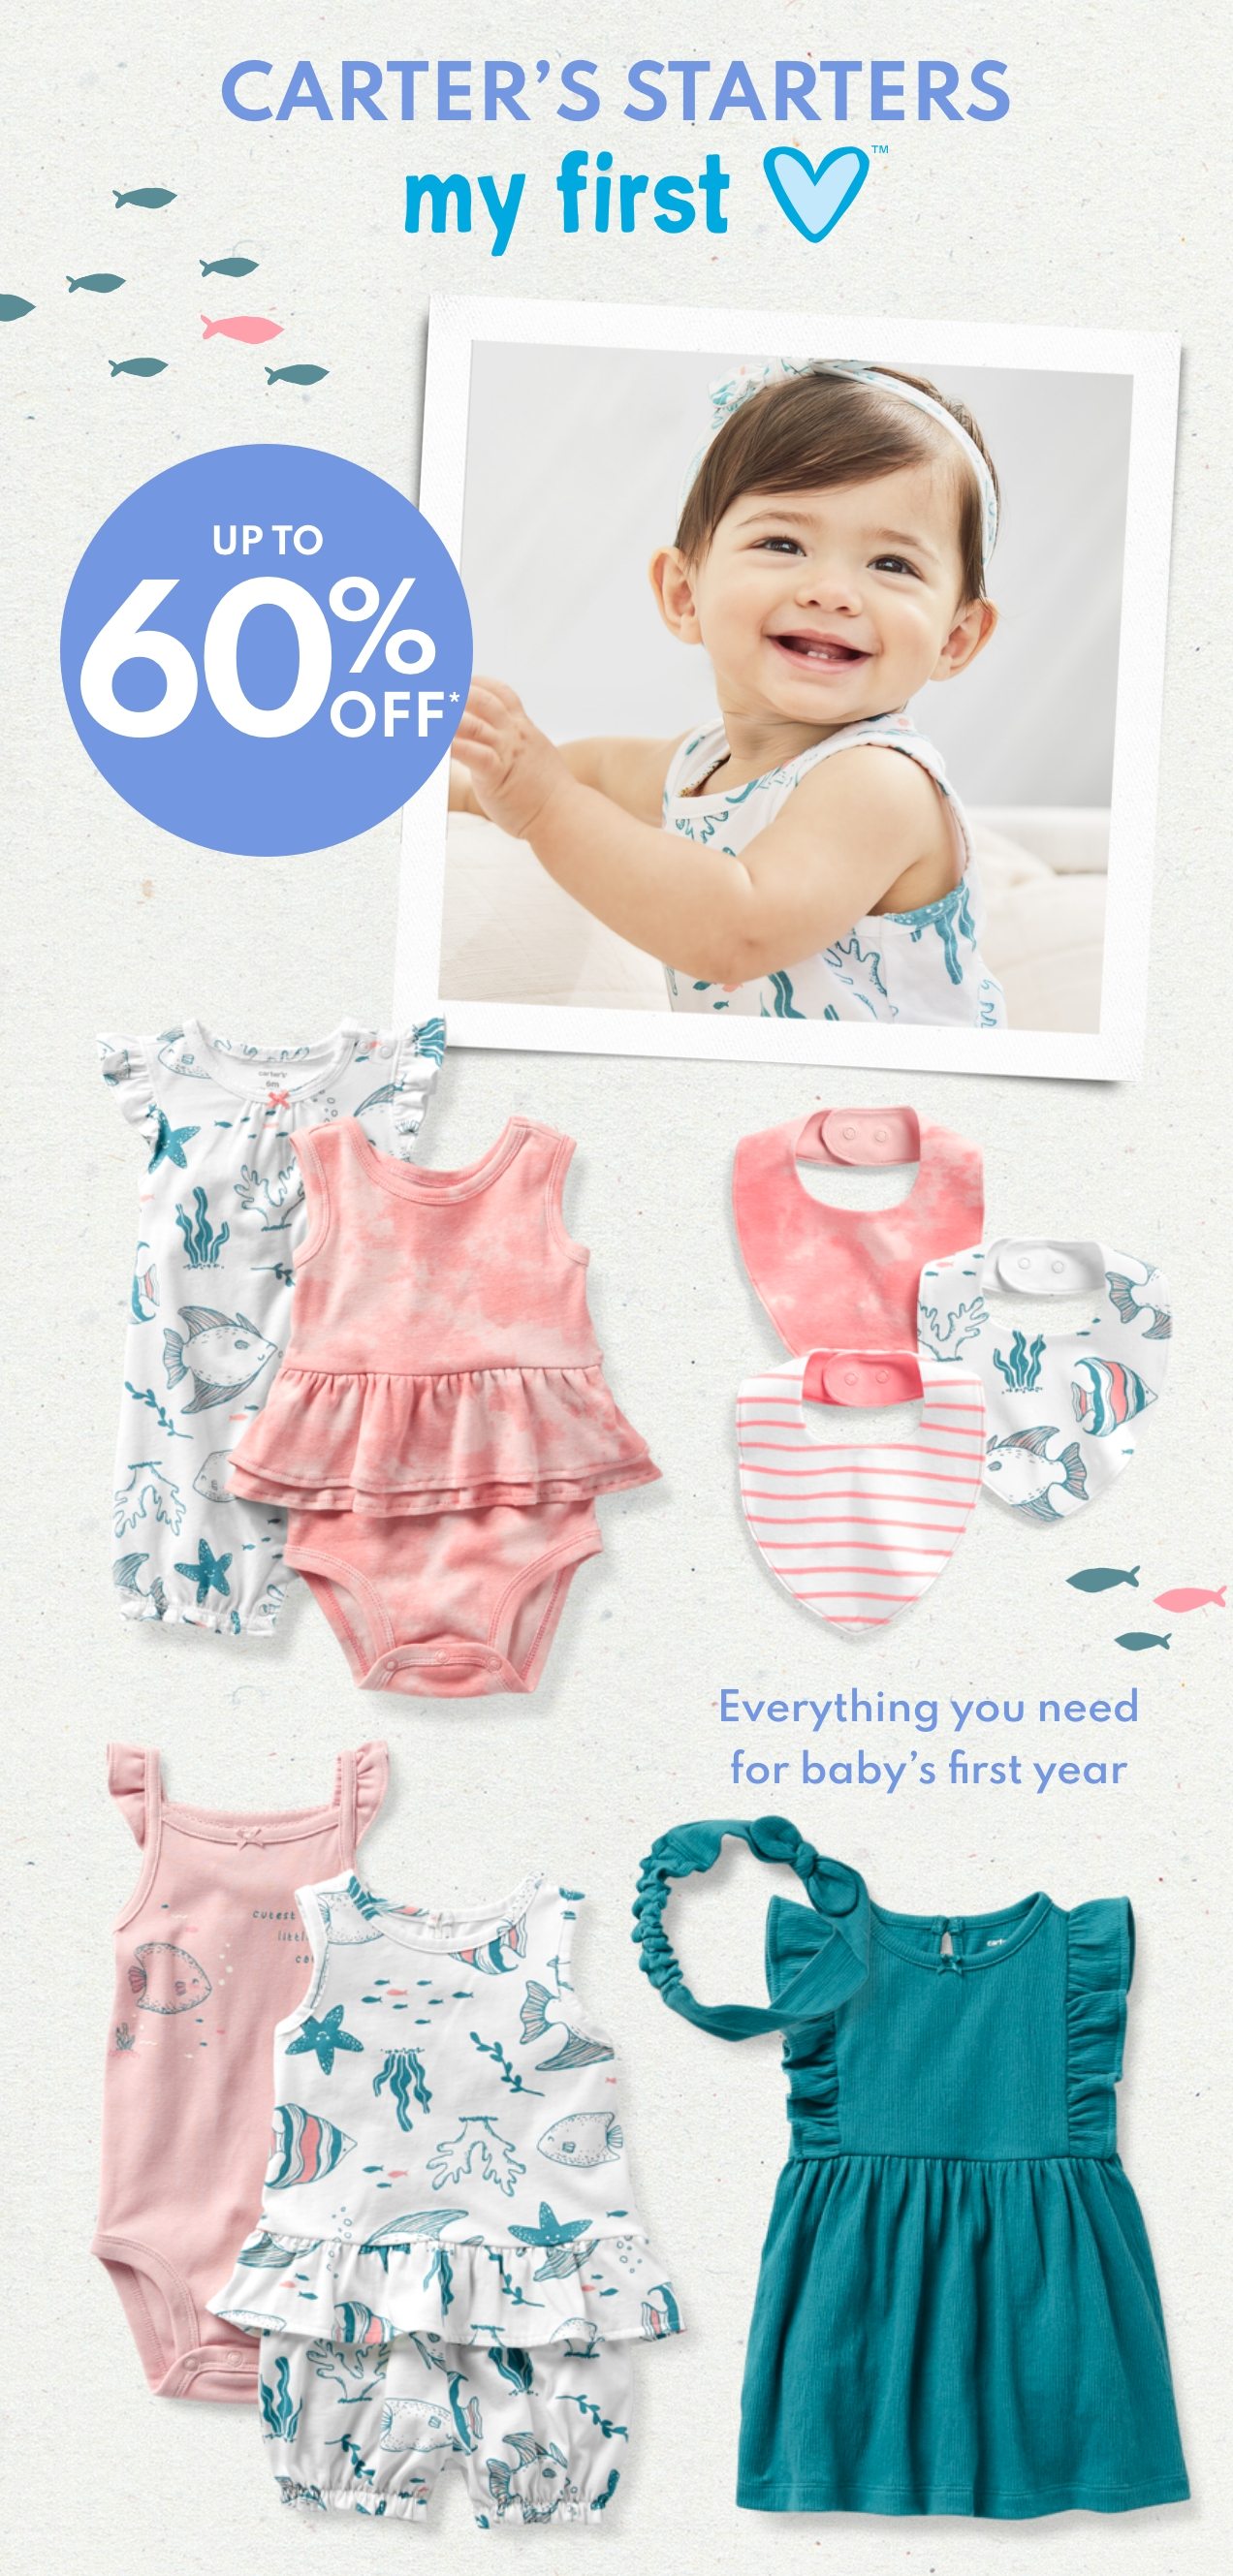 CARTER'S STARTERS | my first loves | UP TO 60% OFF* | Everything you need for baby's first year